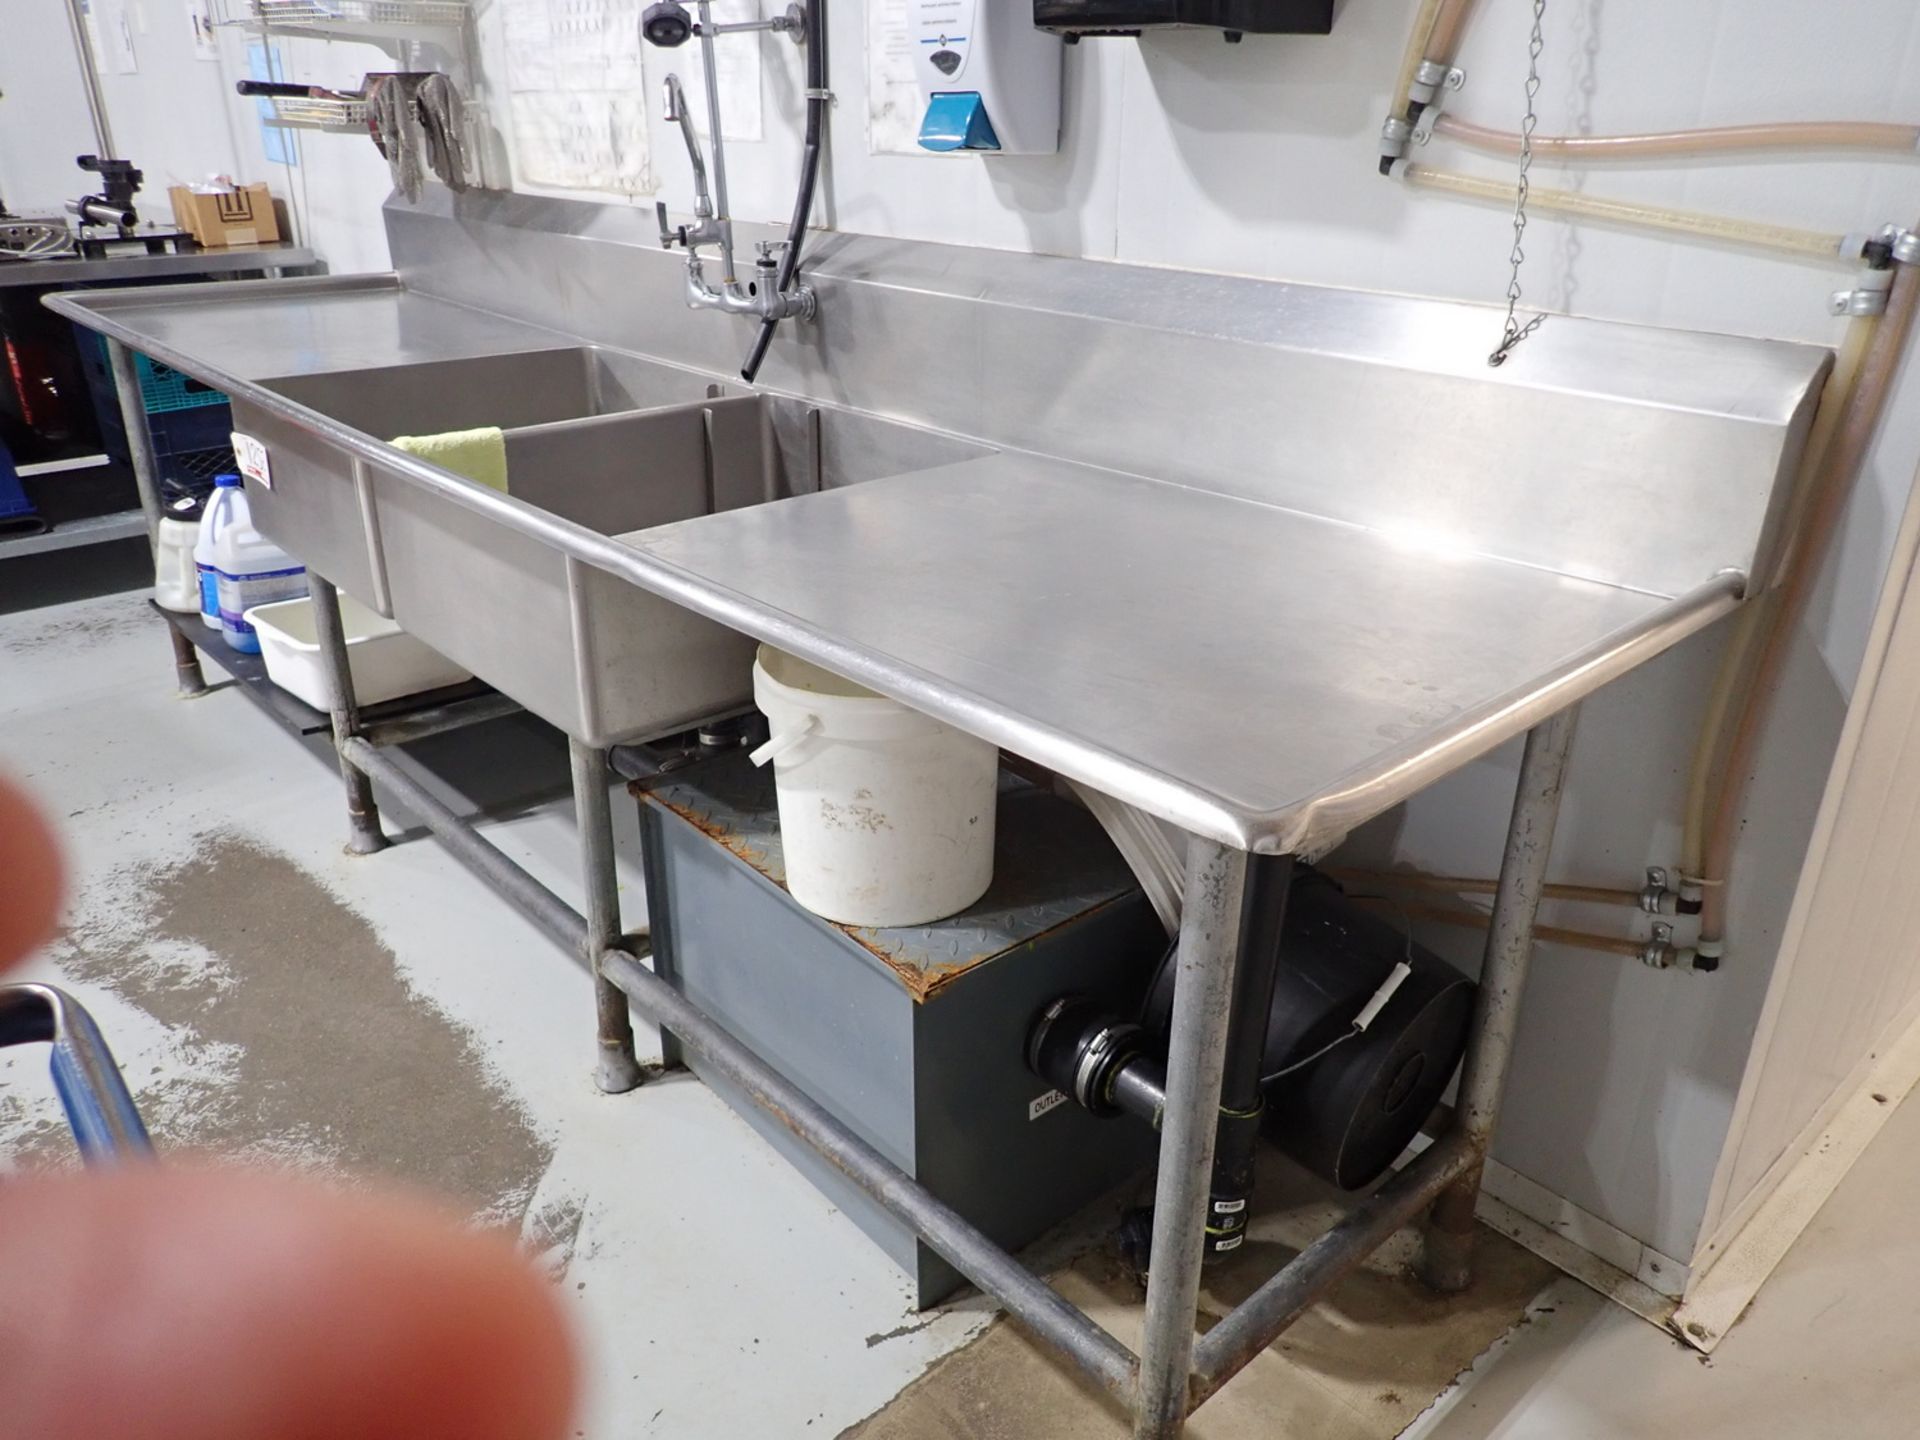 STAINLESS STEEL 2- COMPARTMENT SINK - 30" X 119" X 34" - Image 3 of 3